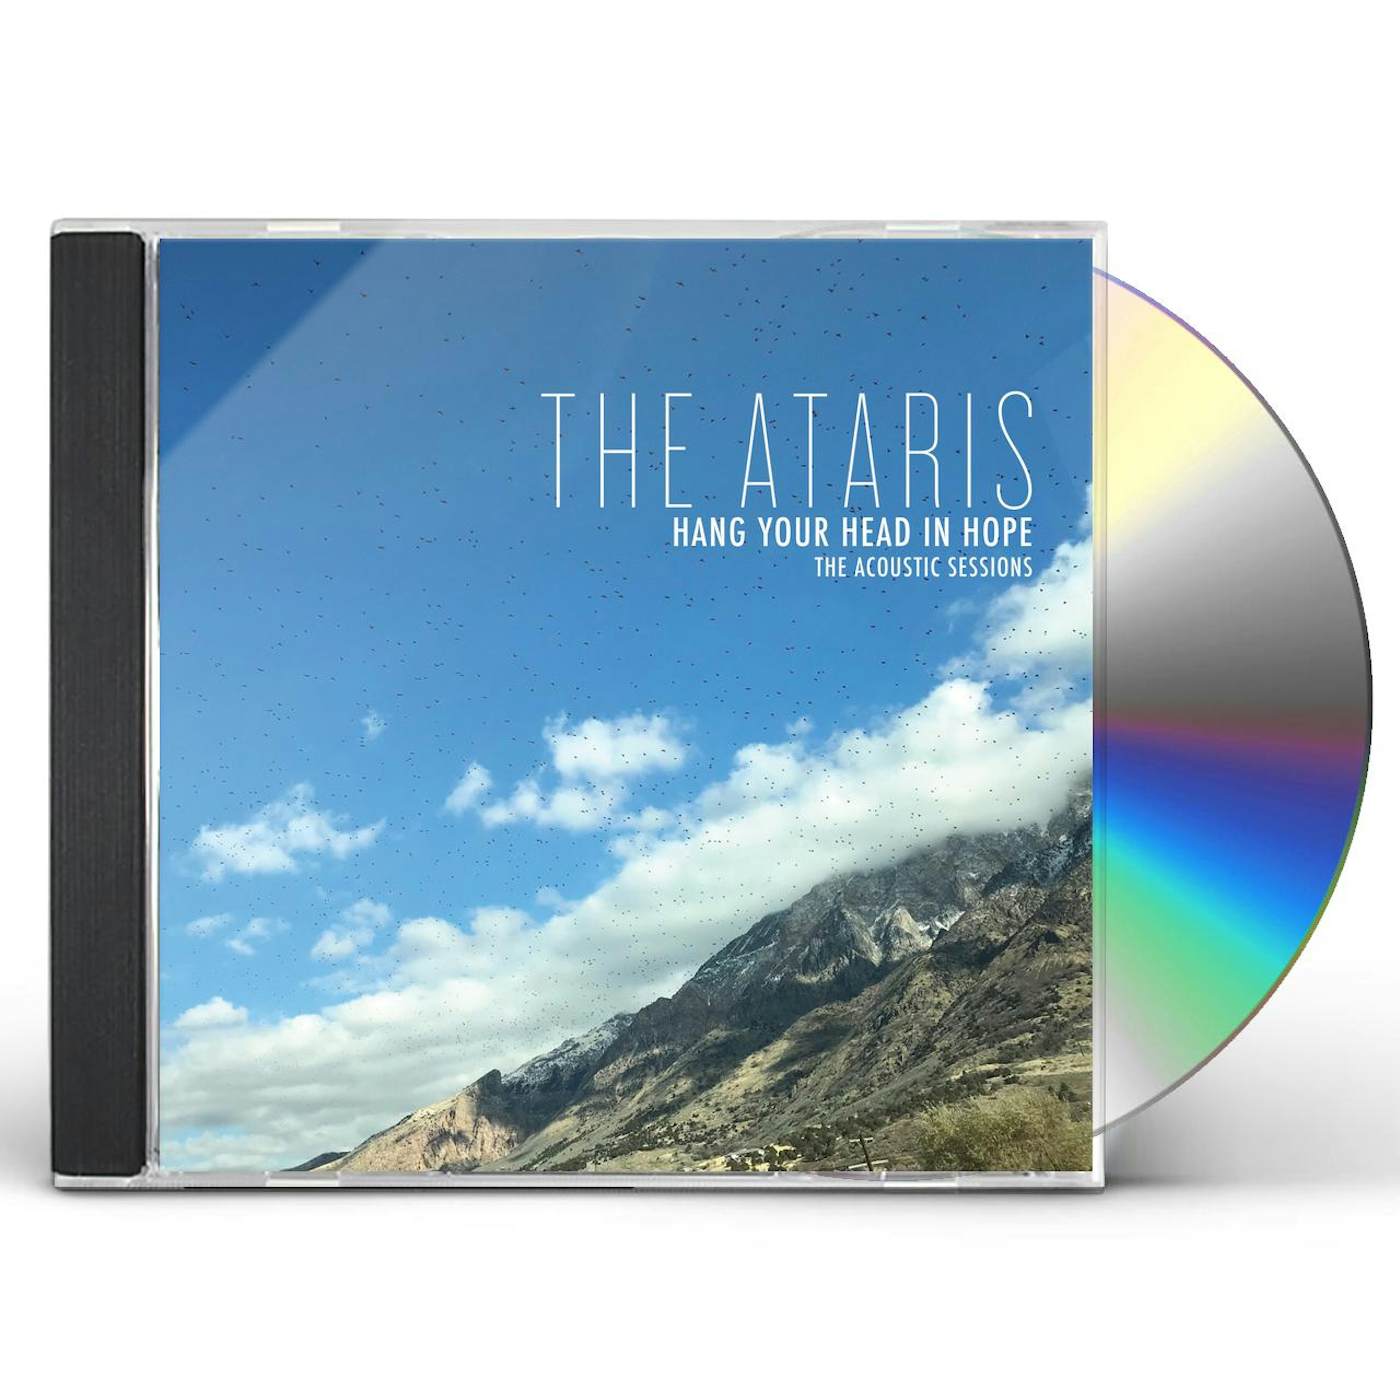 The Ataris HANG YOUR HEAD IN HOPE - THE ACOUSTIC SESSIONS CD